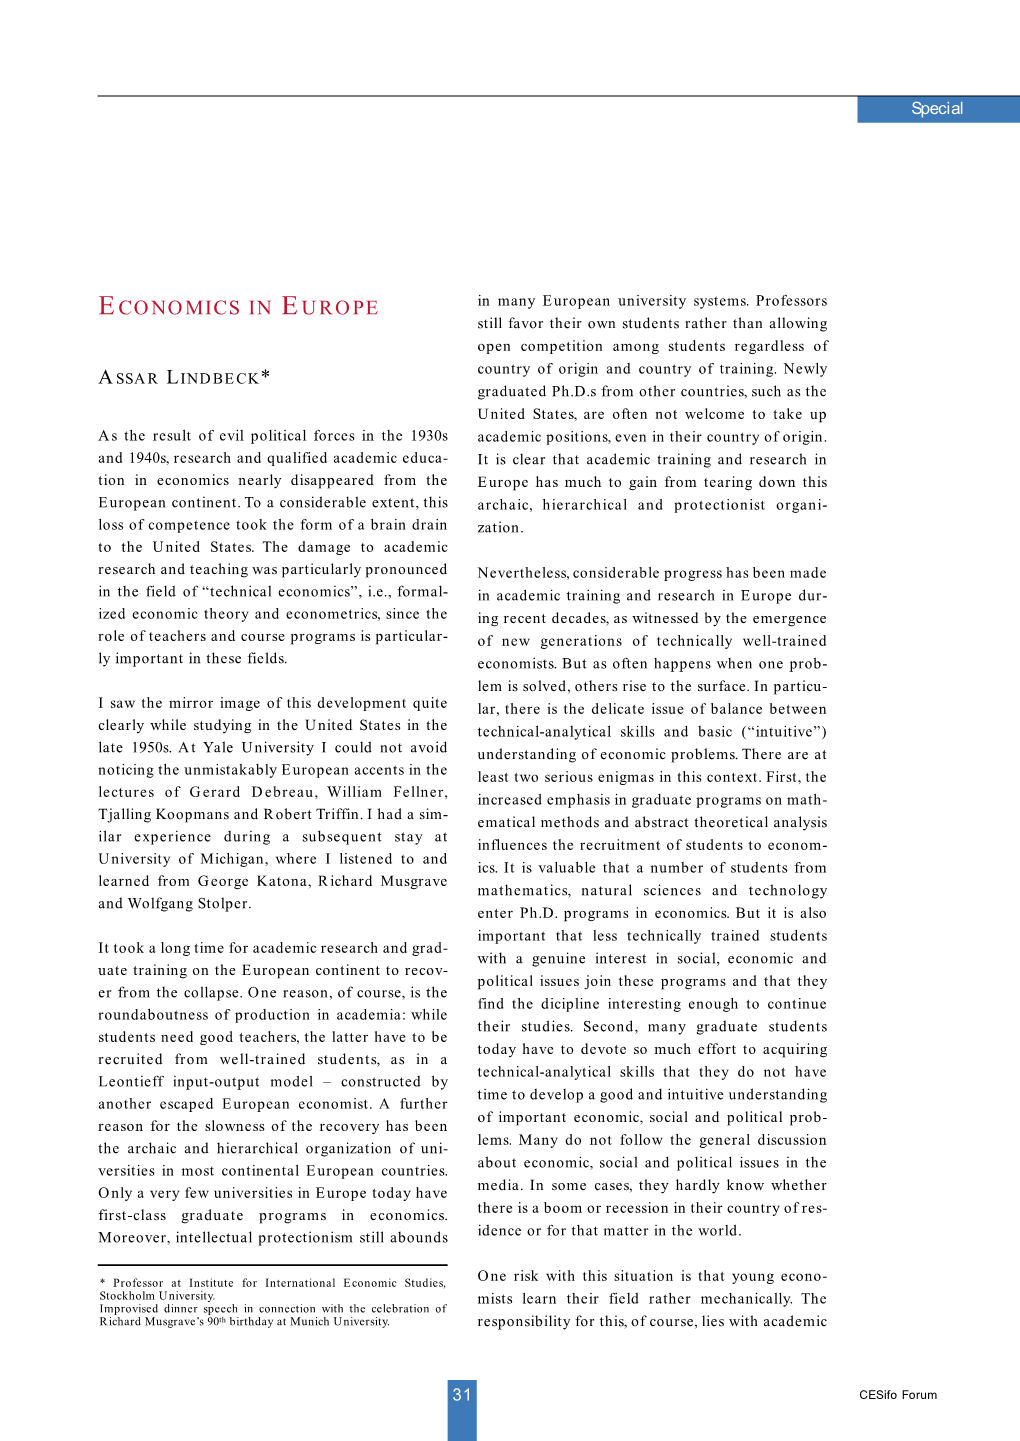 ECONOMICS in EUROPE in Many European University Systems